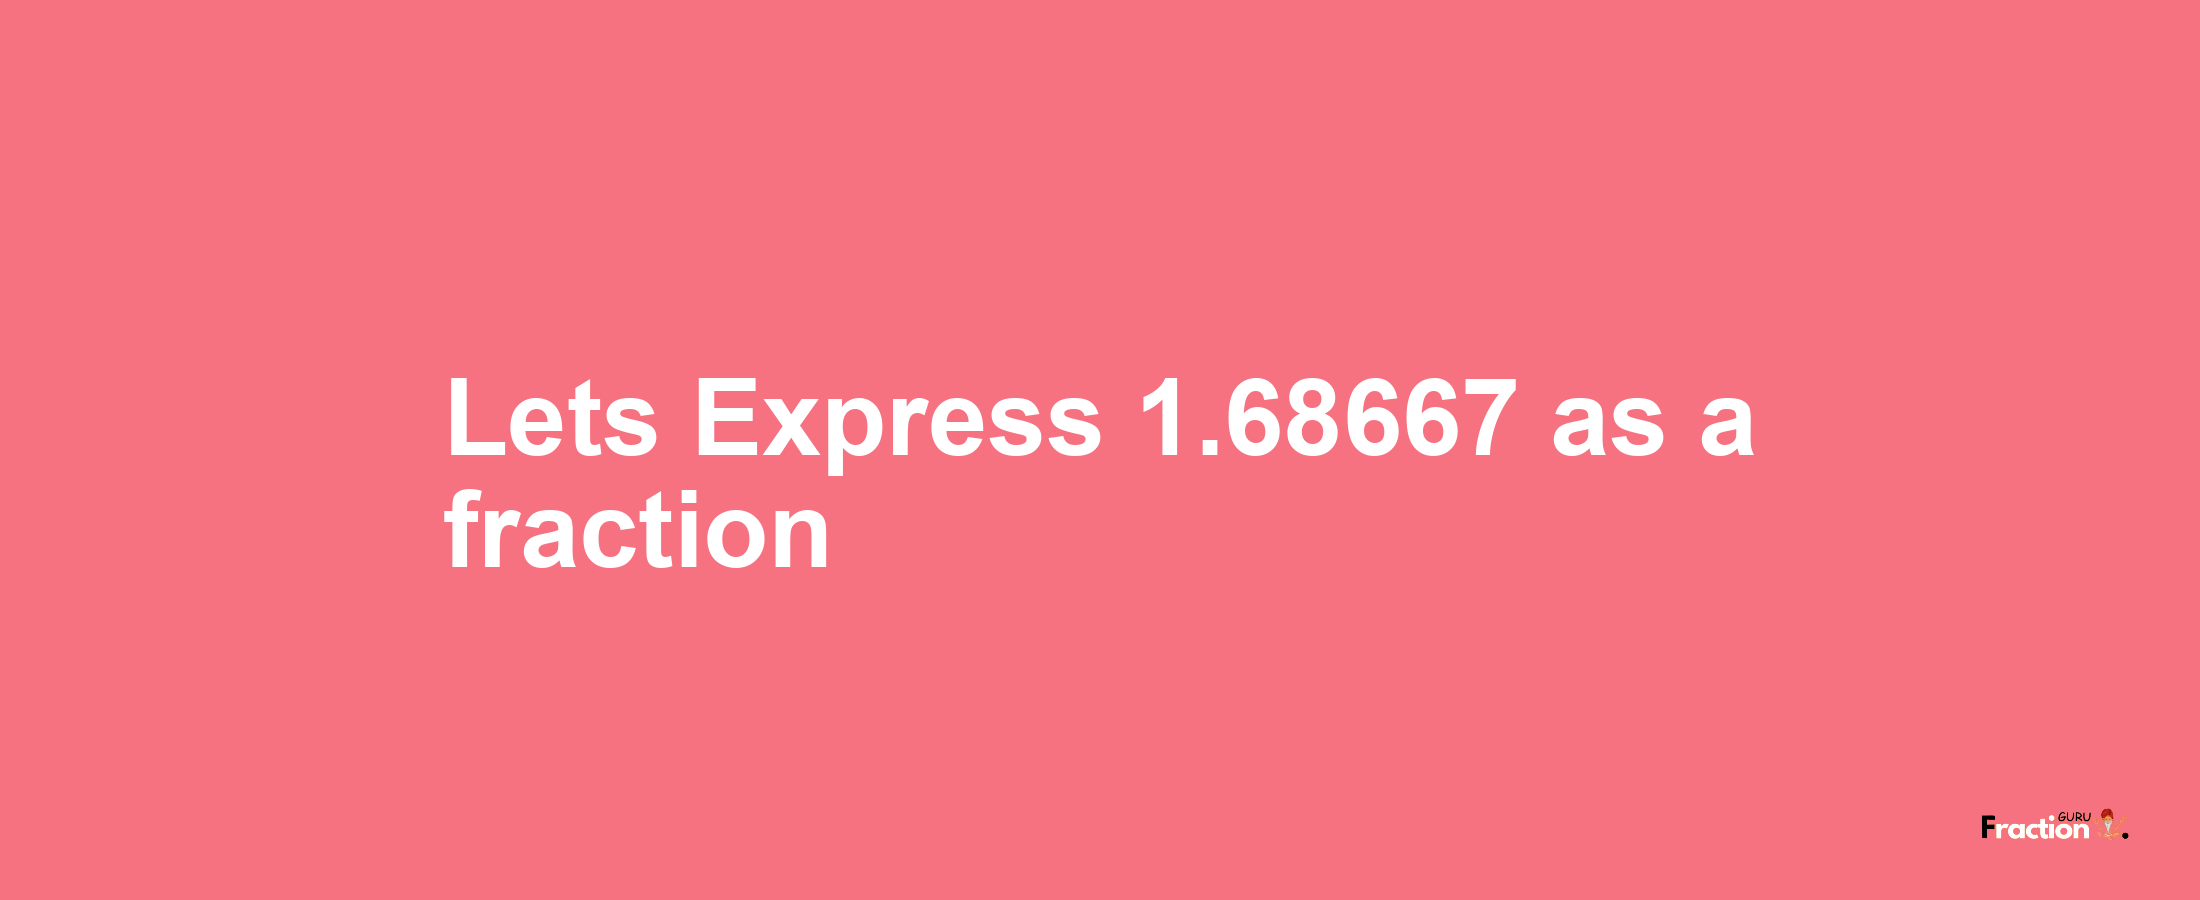 Lets Express 1.68667 as afraction